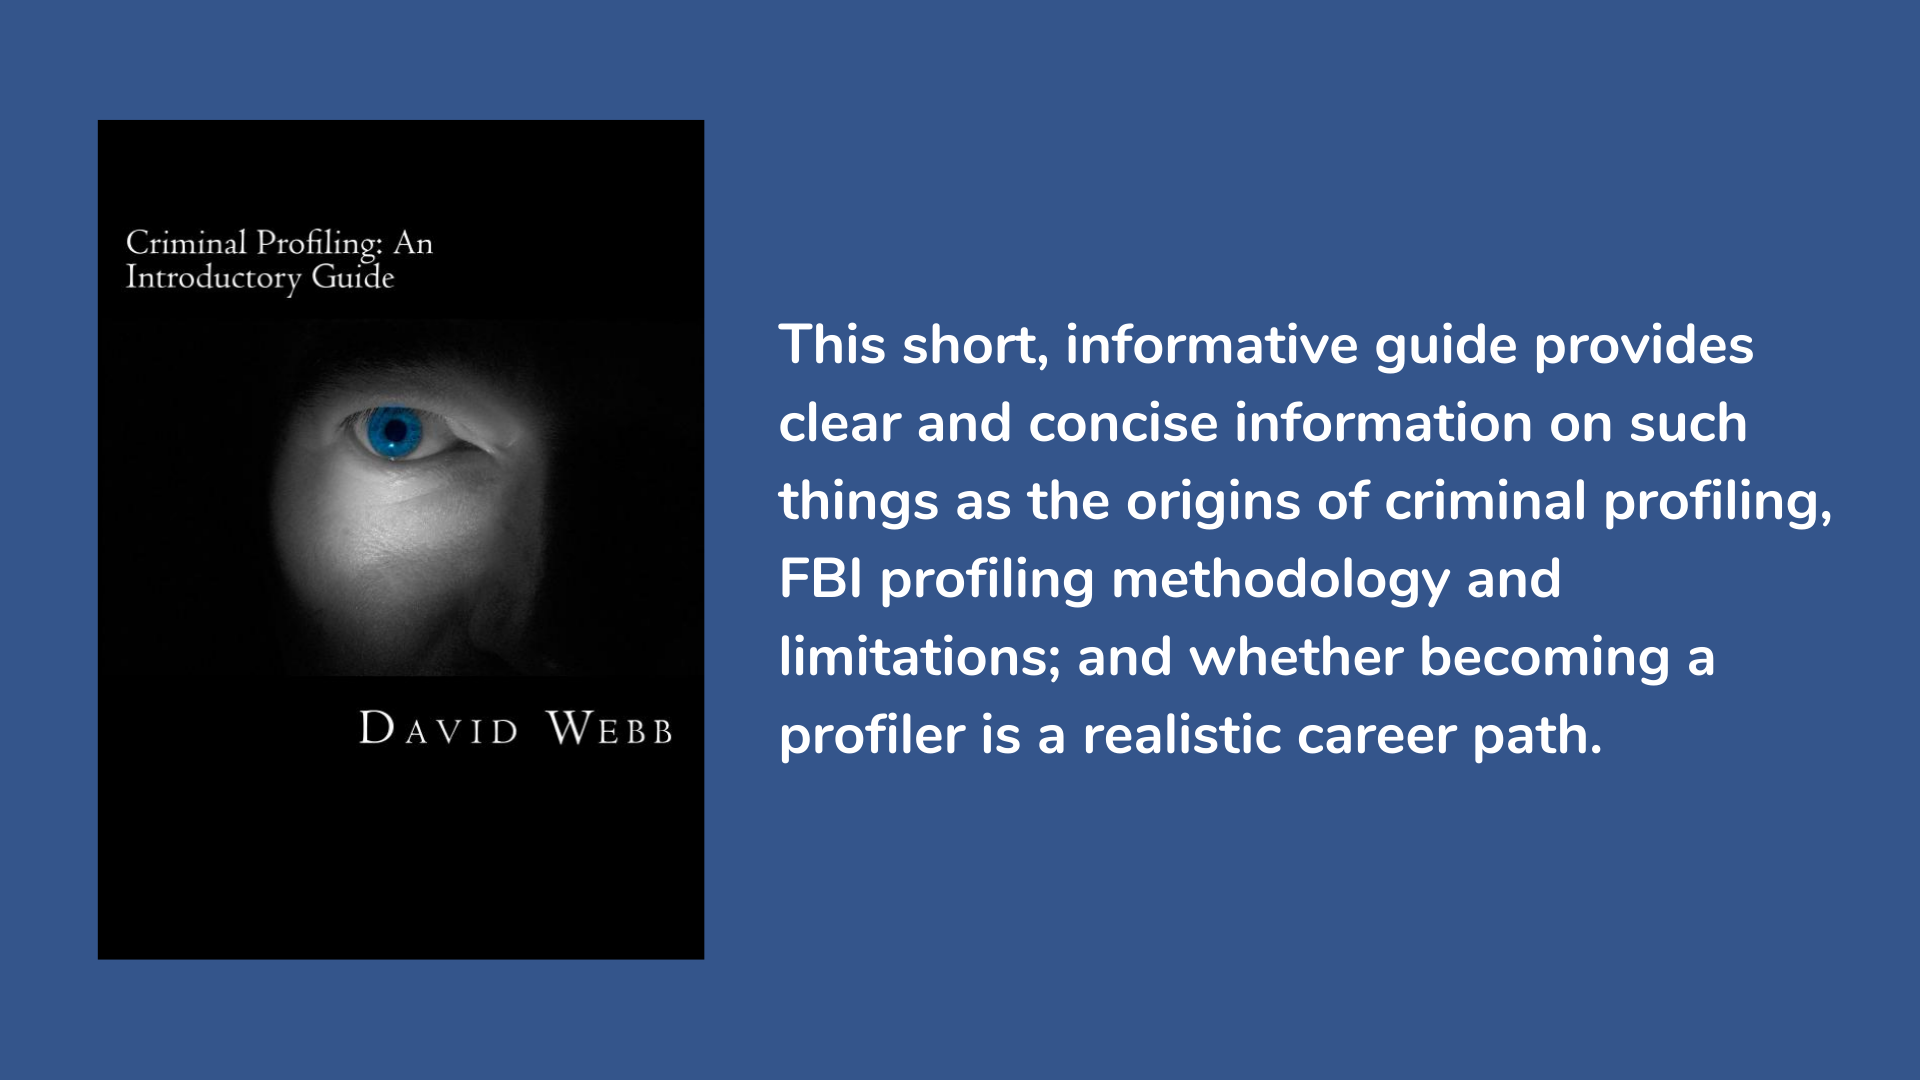 Criminal Profiling: An Introductory Guide by David Webb. Book cover and description.